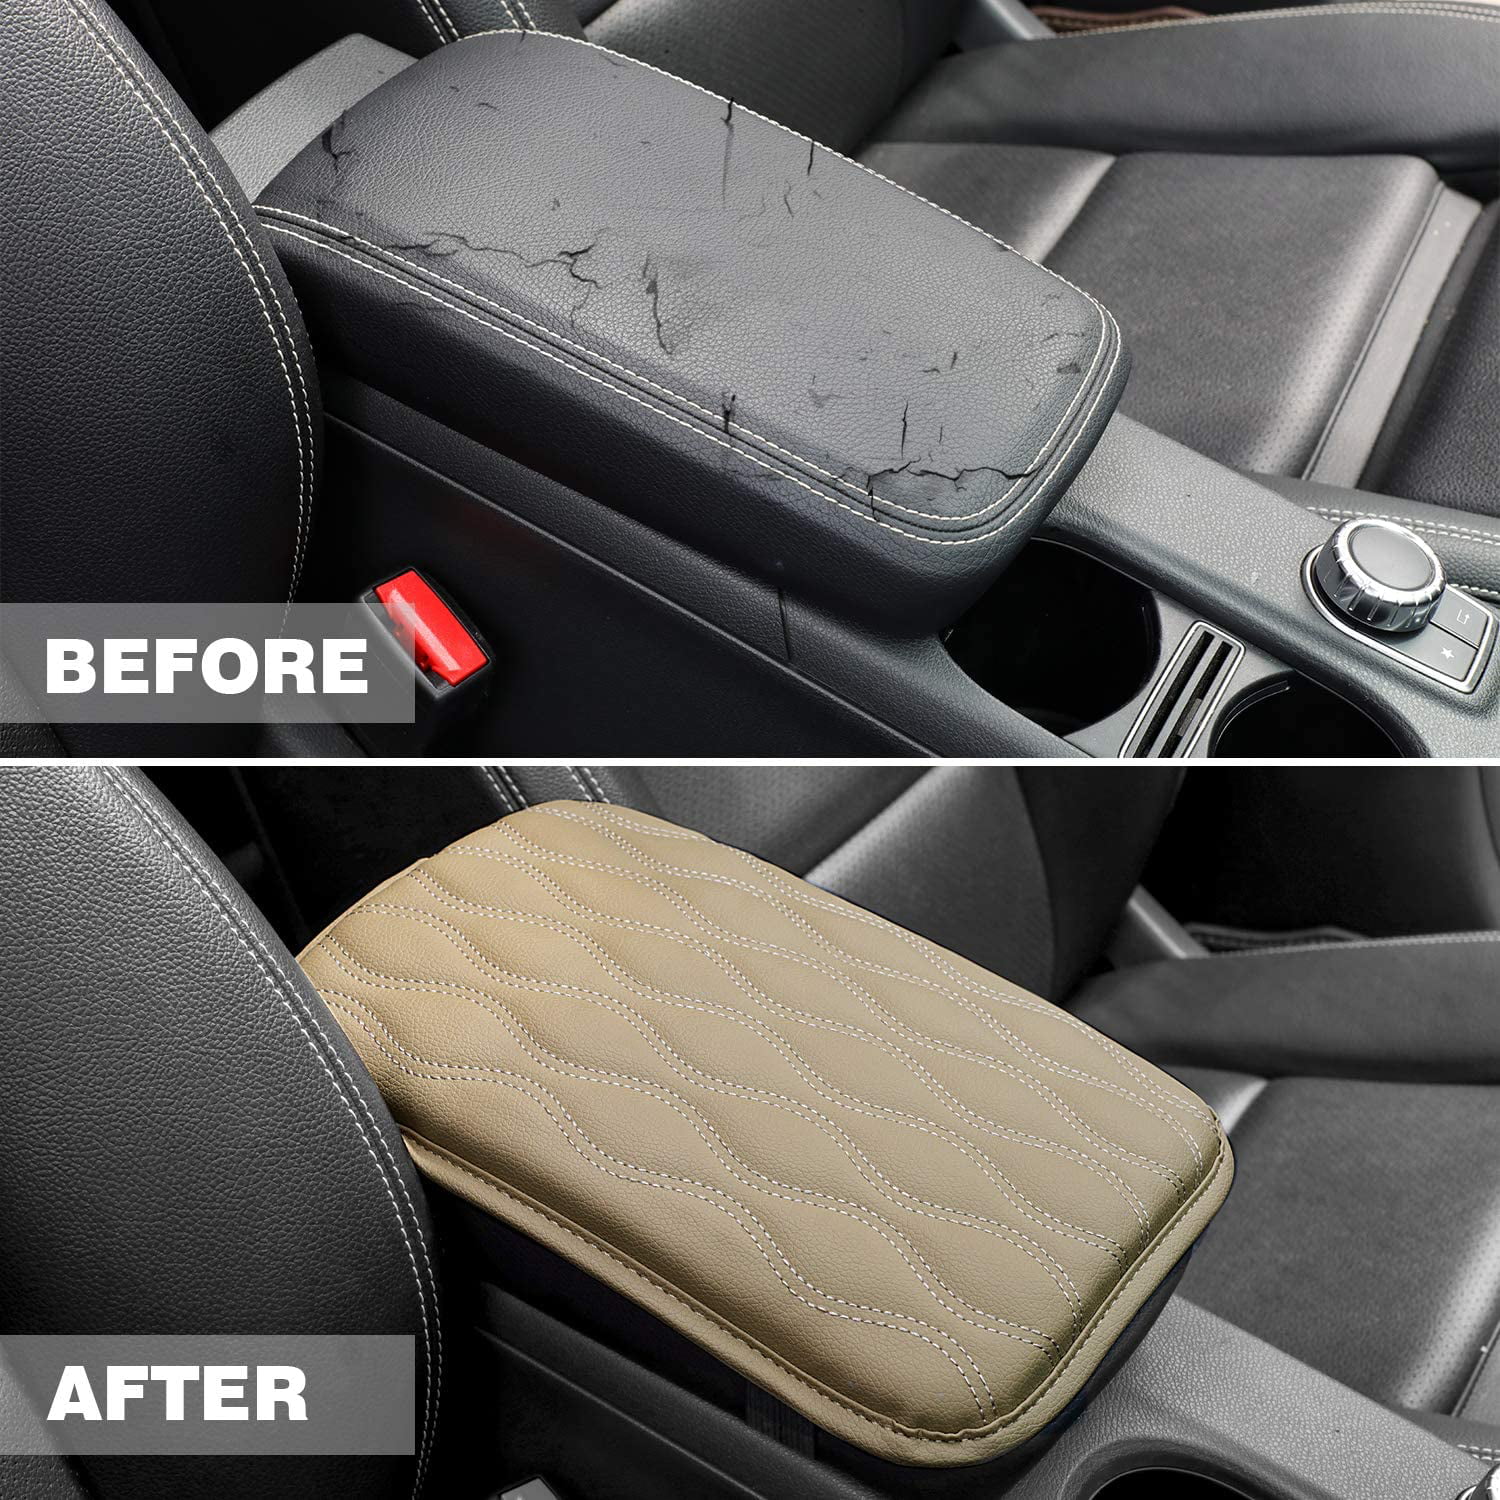 Seven Sparta Car Interior Center Console Cover Armrest Cushion Pad 11.6 x  8.2 in 